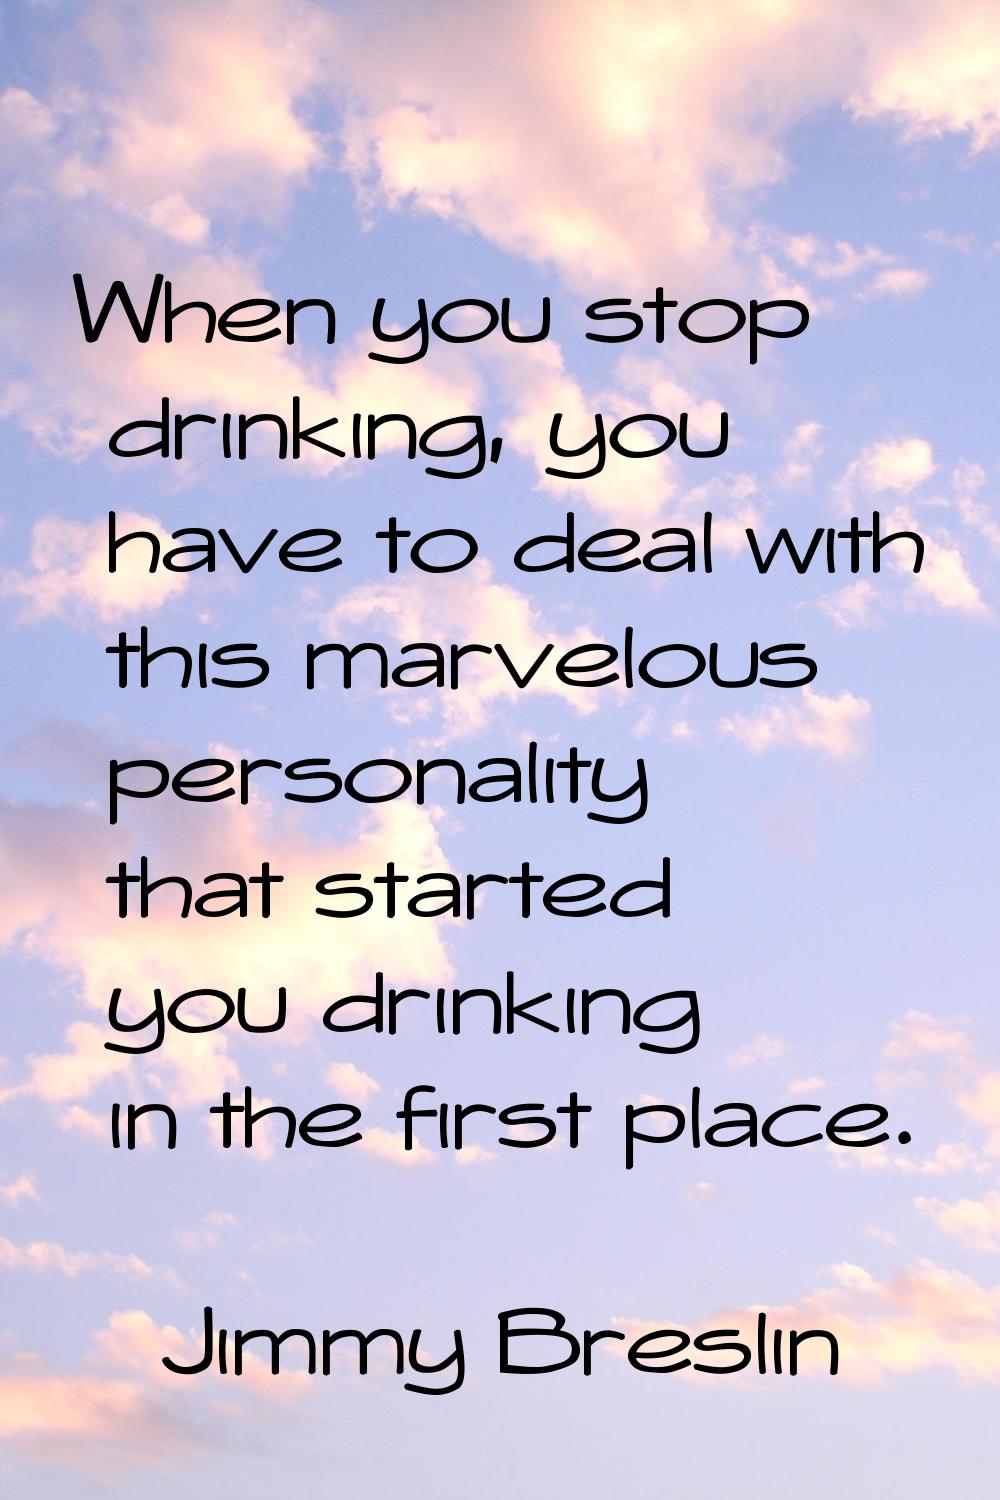 When you stop drinking, you have to deal with this marvelous personality that started you drinking 